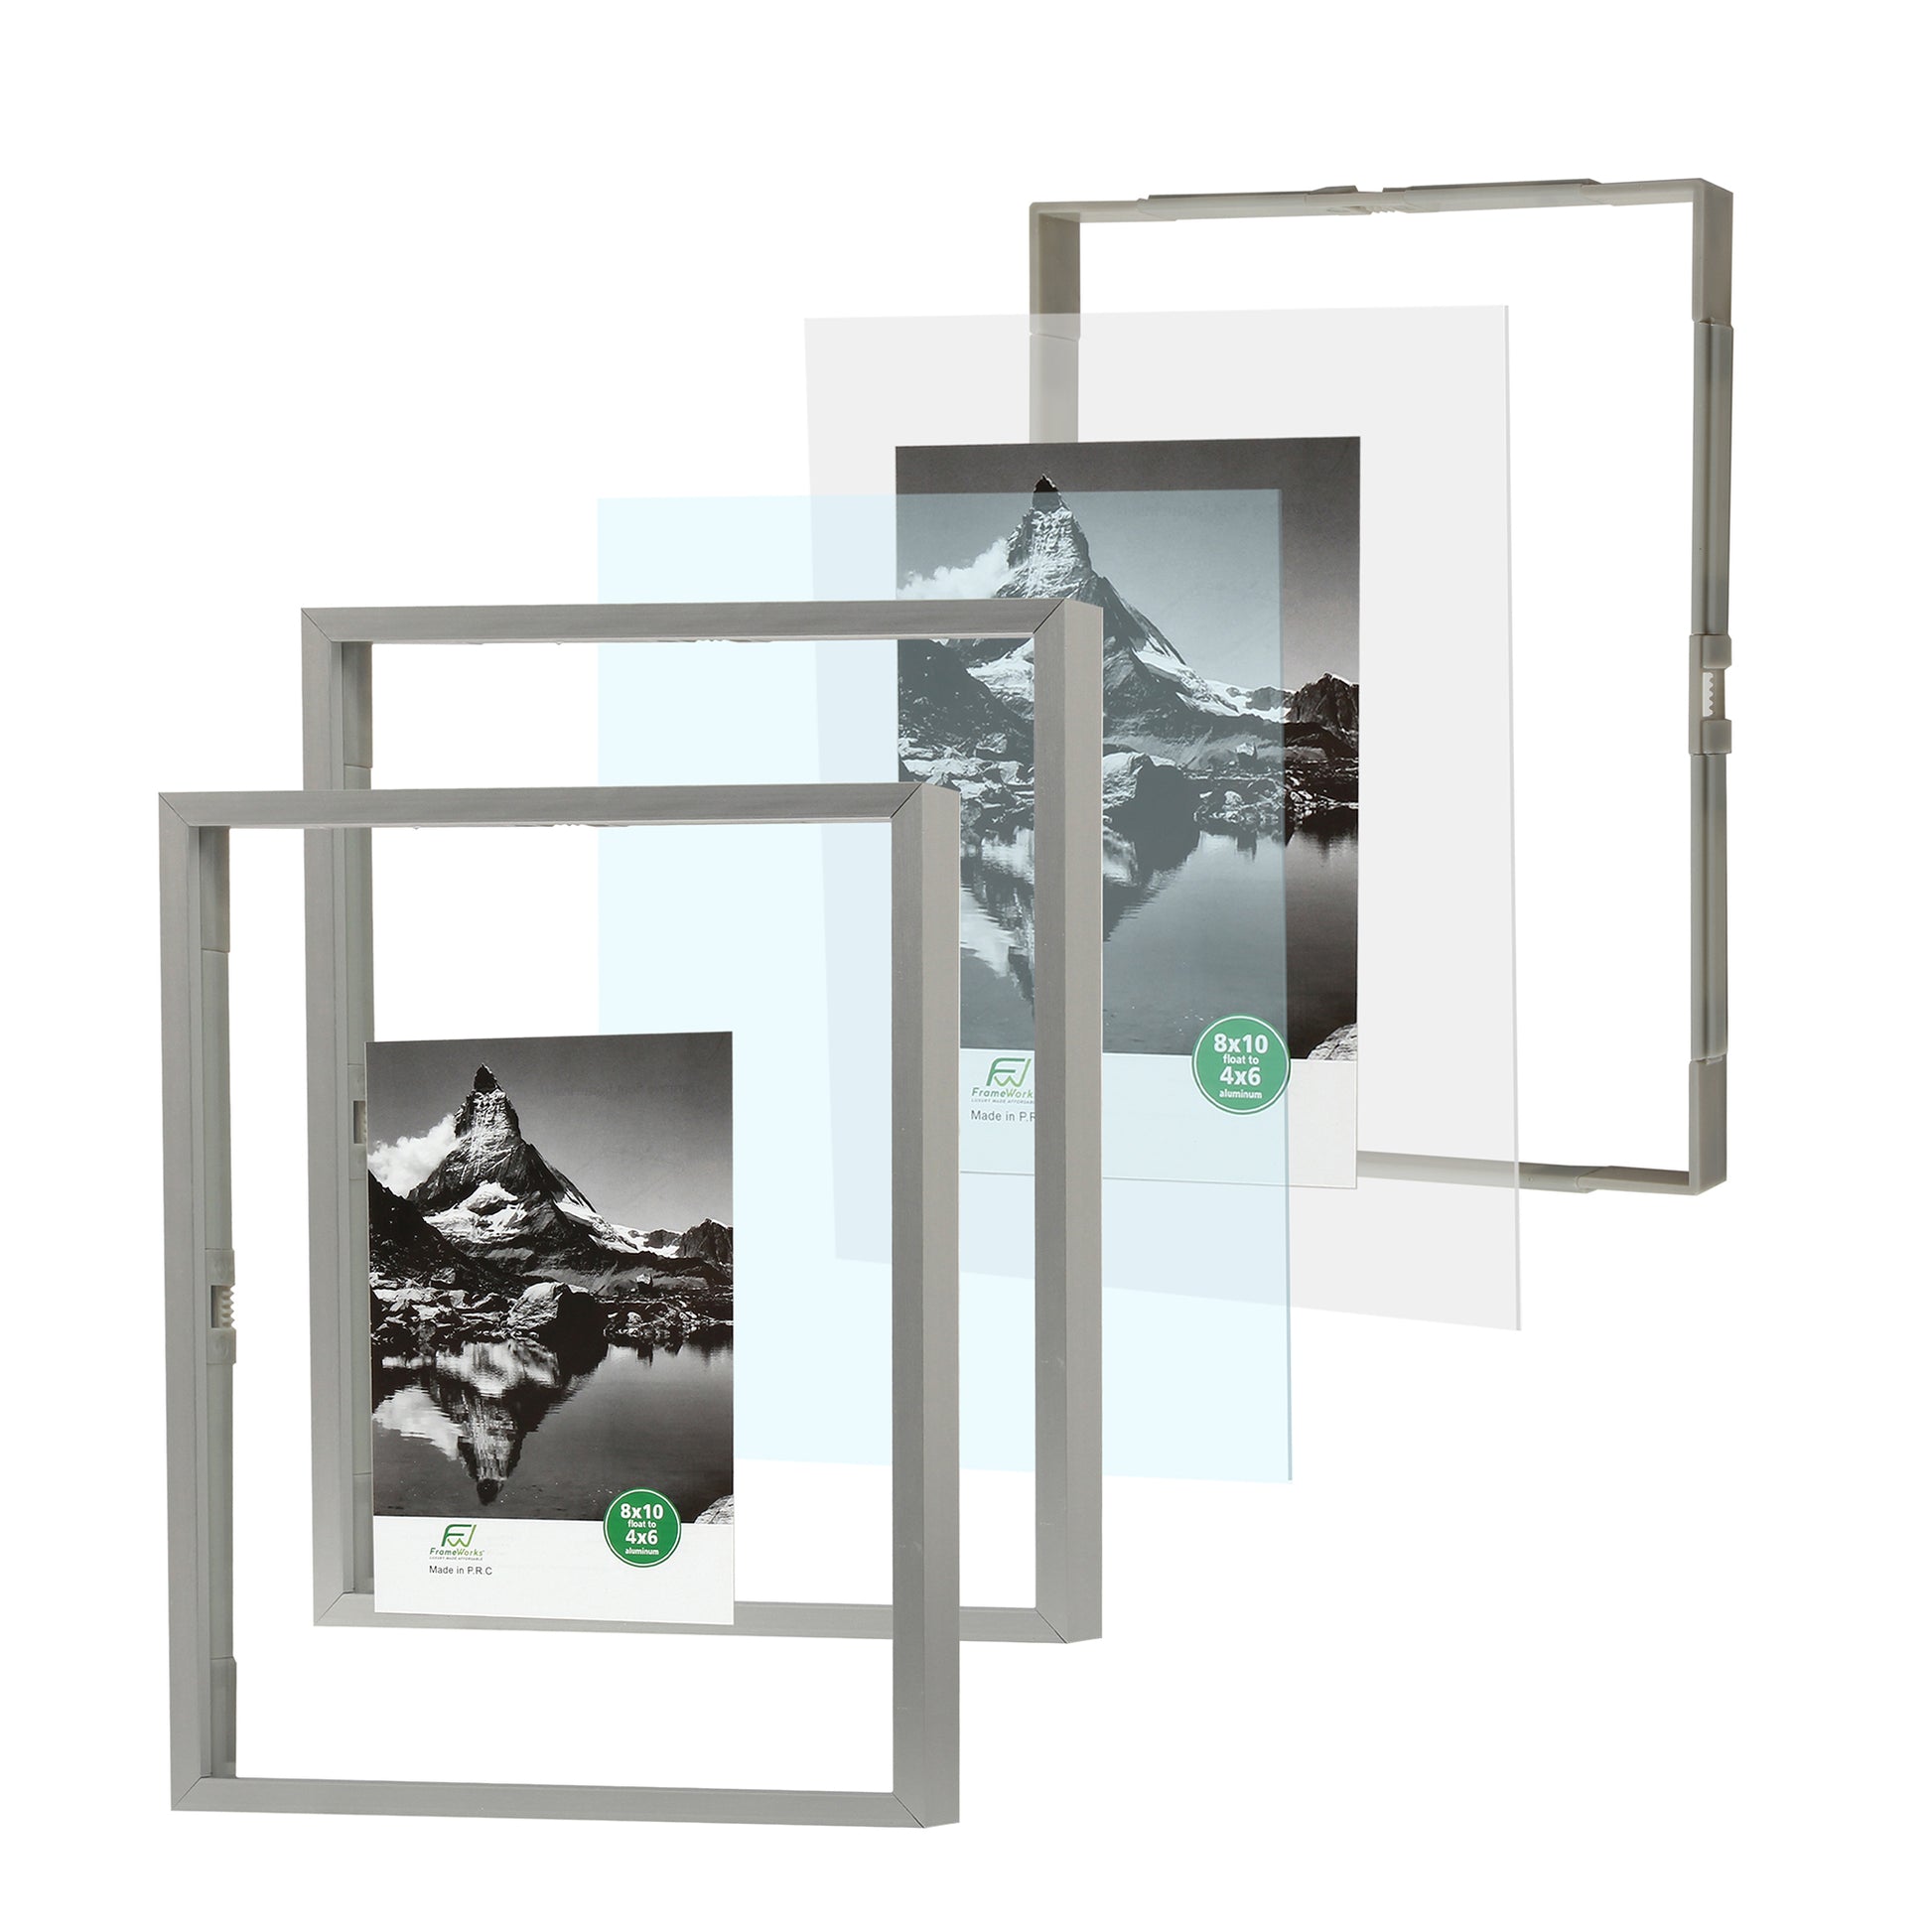 12 x 12 Deluxe Silver Aluminum Contemporary Picture Frame, 8 x 8 M –  FrameWorks